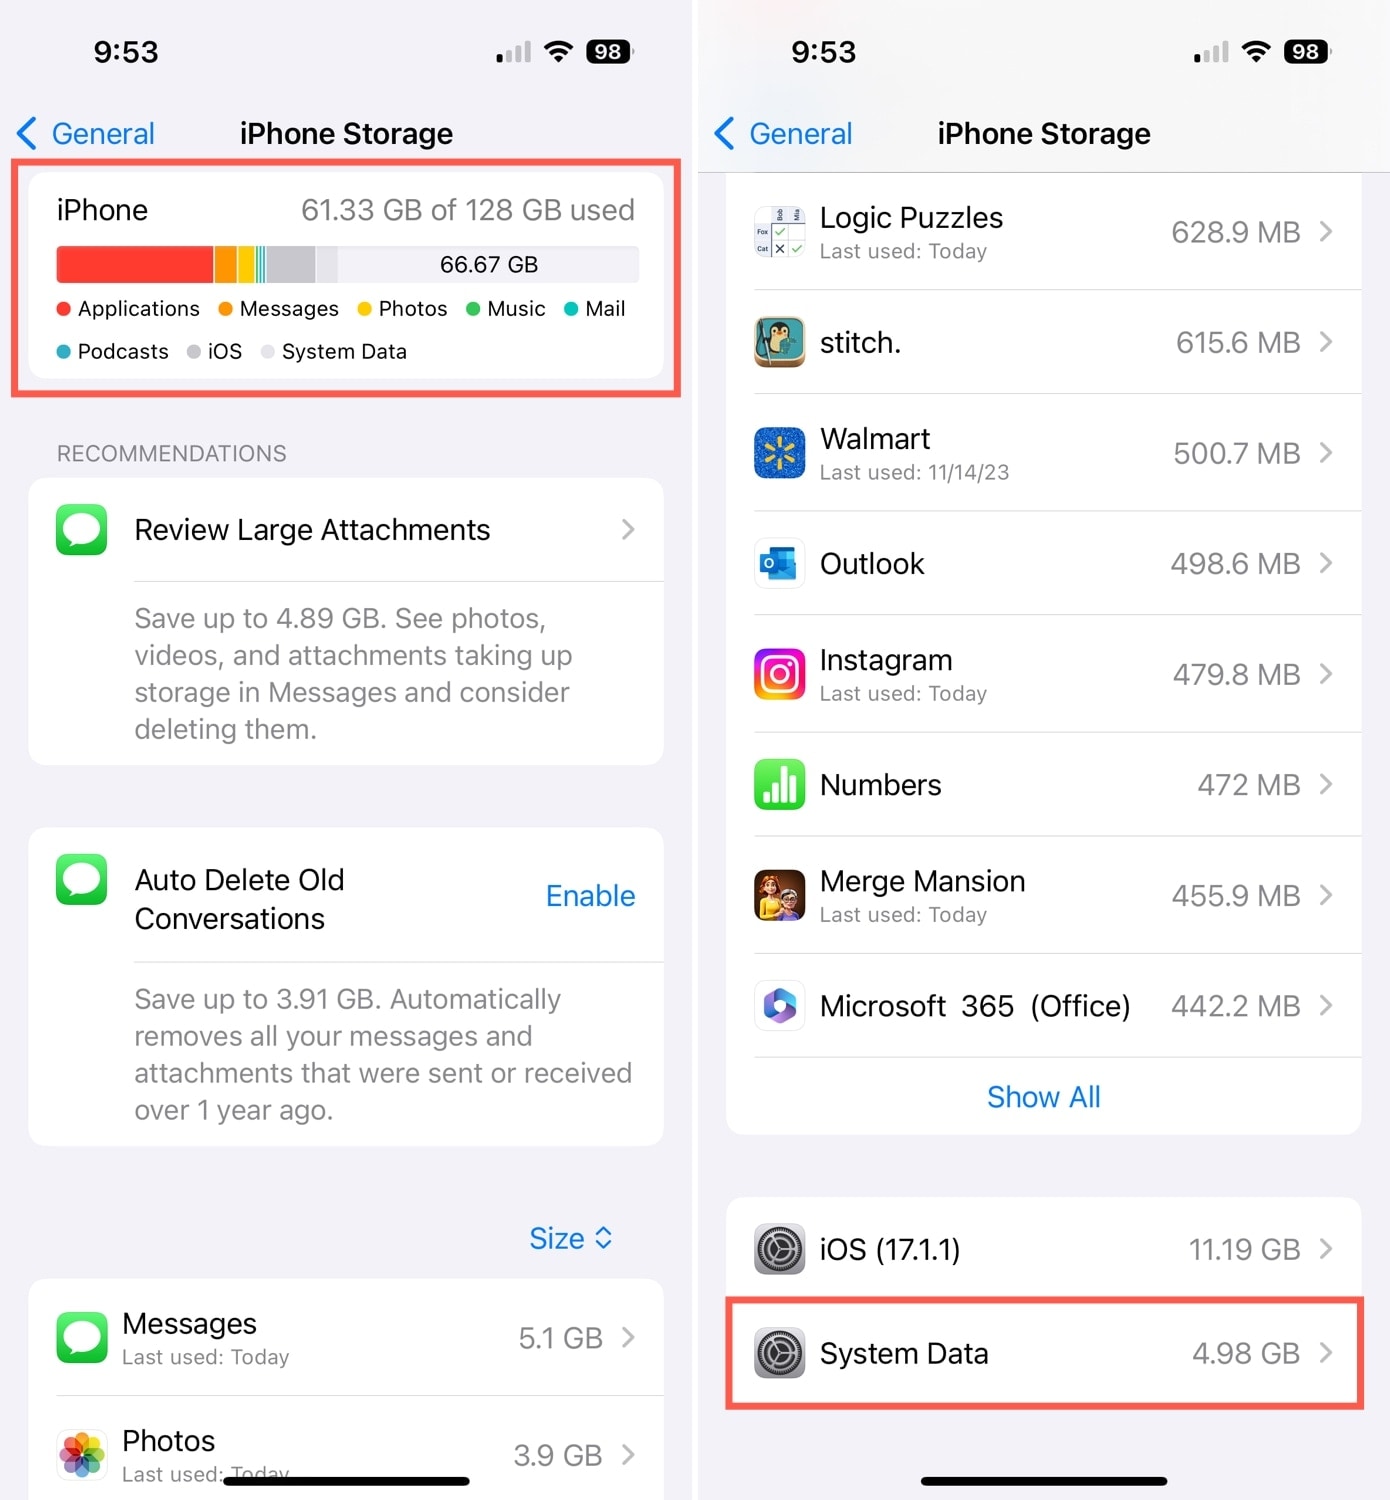 iPhone Storage and System Data